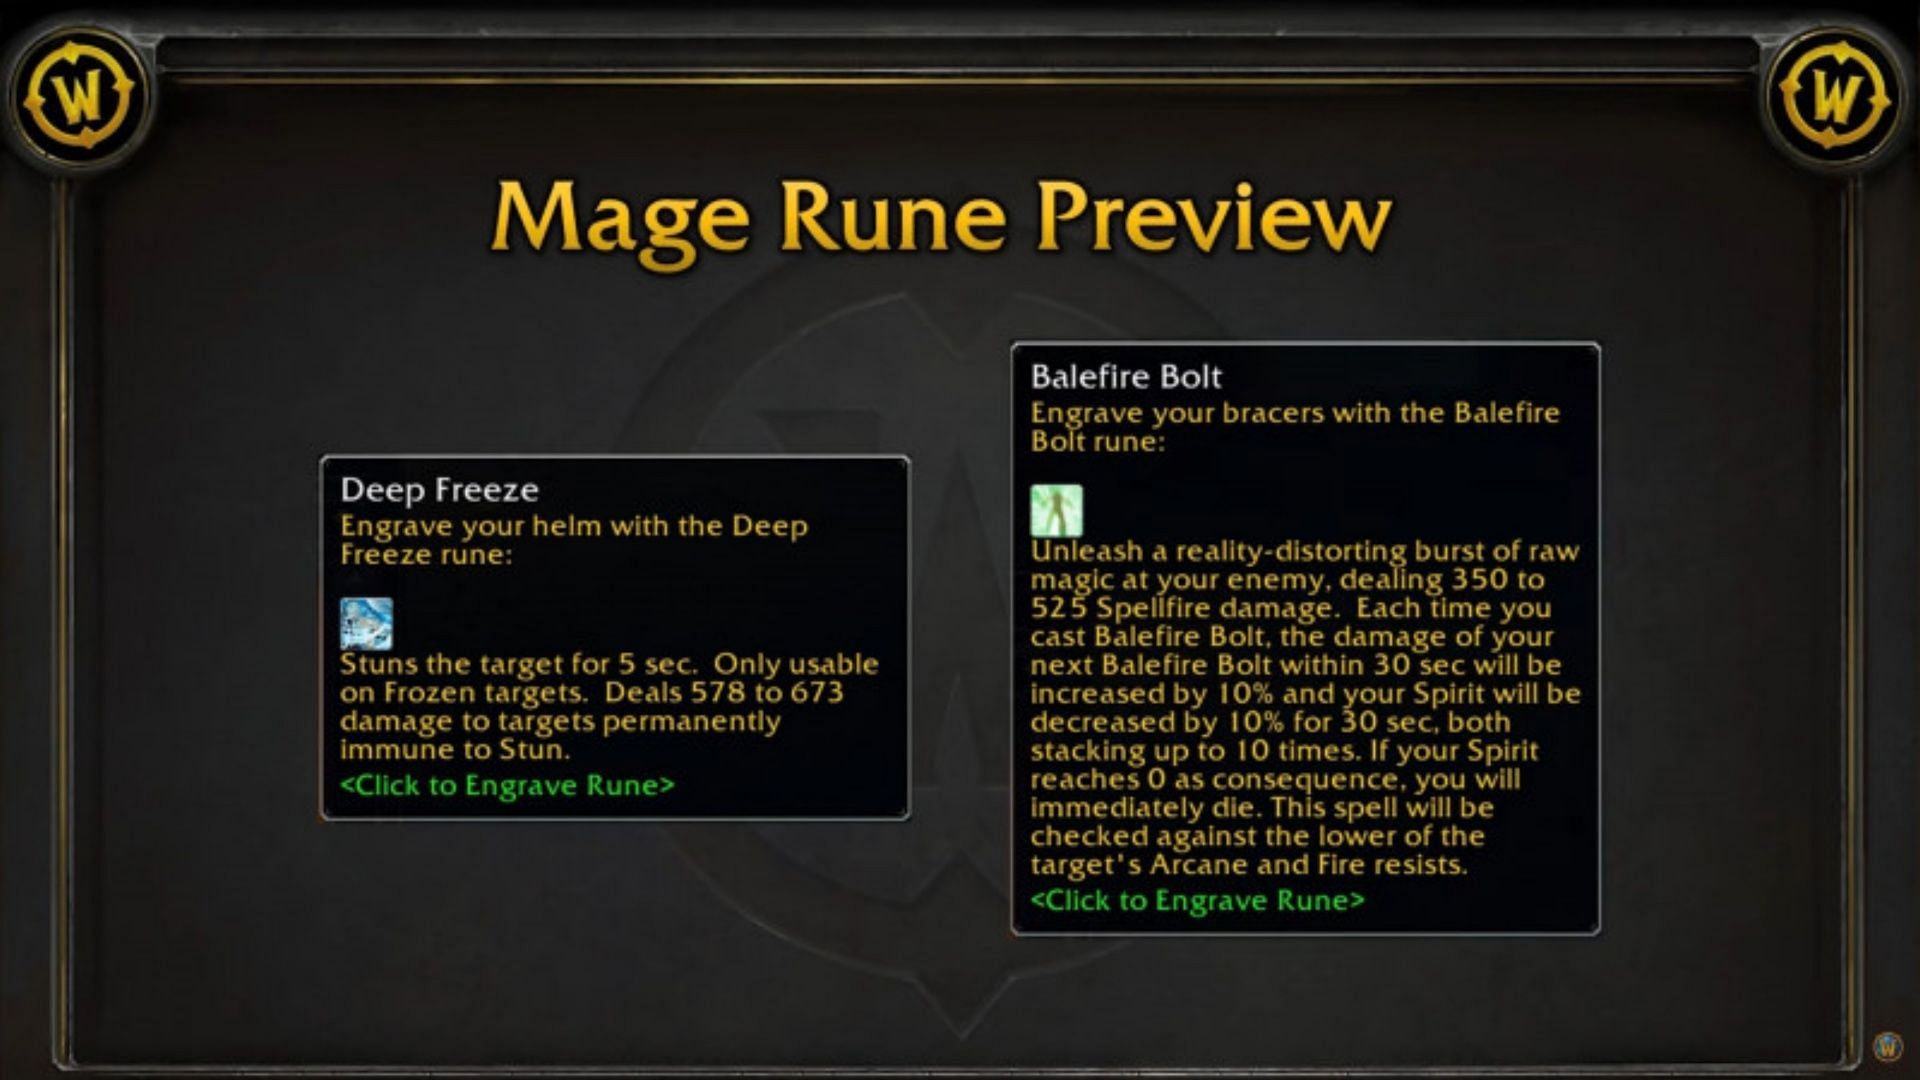 New runes for Mage in WoW Classic SoD Phase 3 (Image via Blizzard Entertainment)